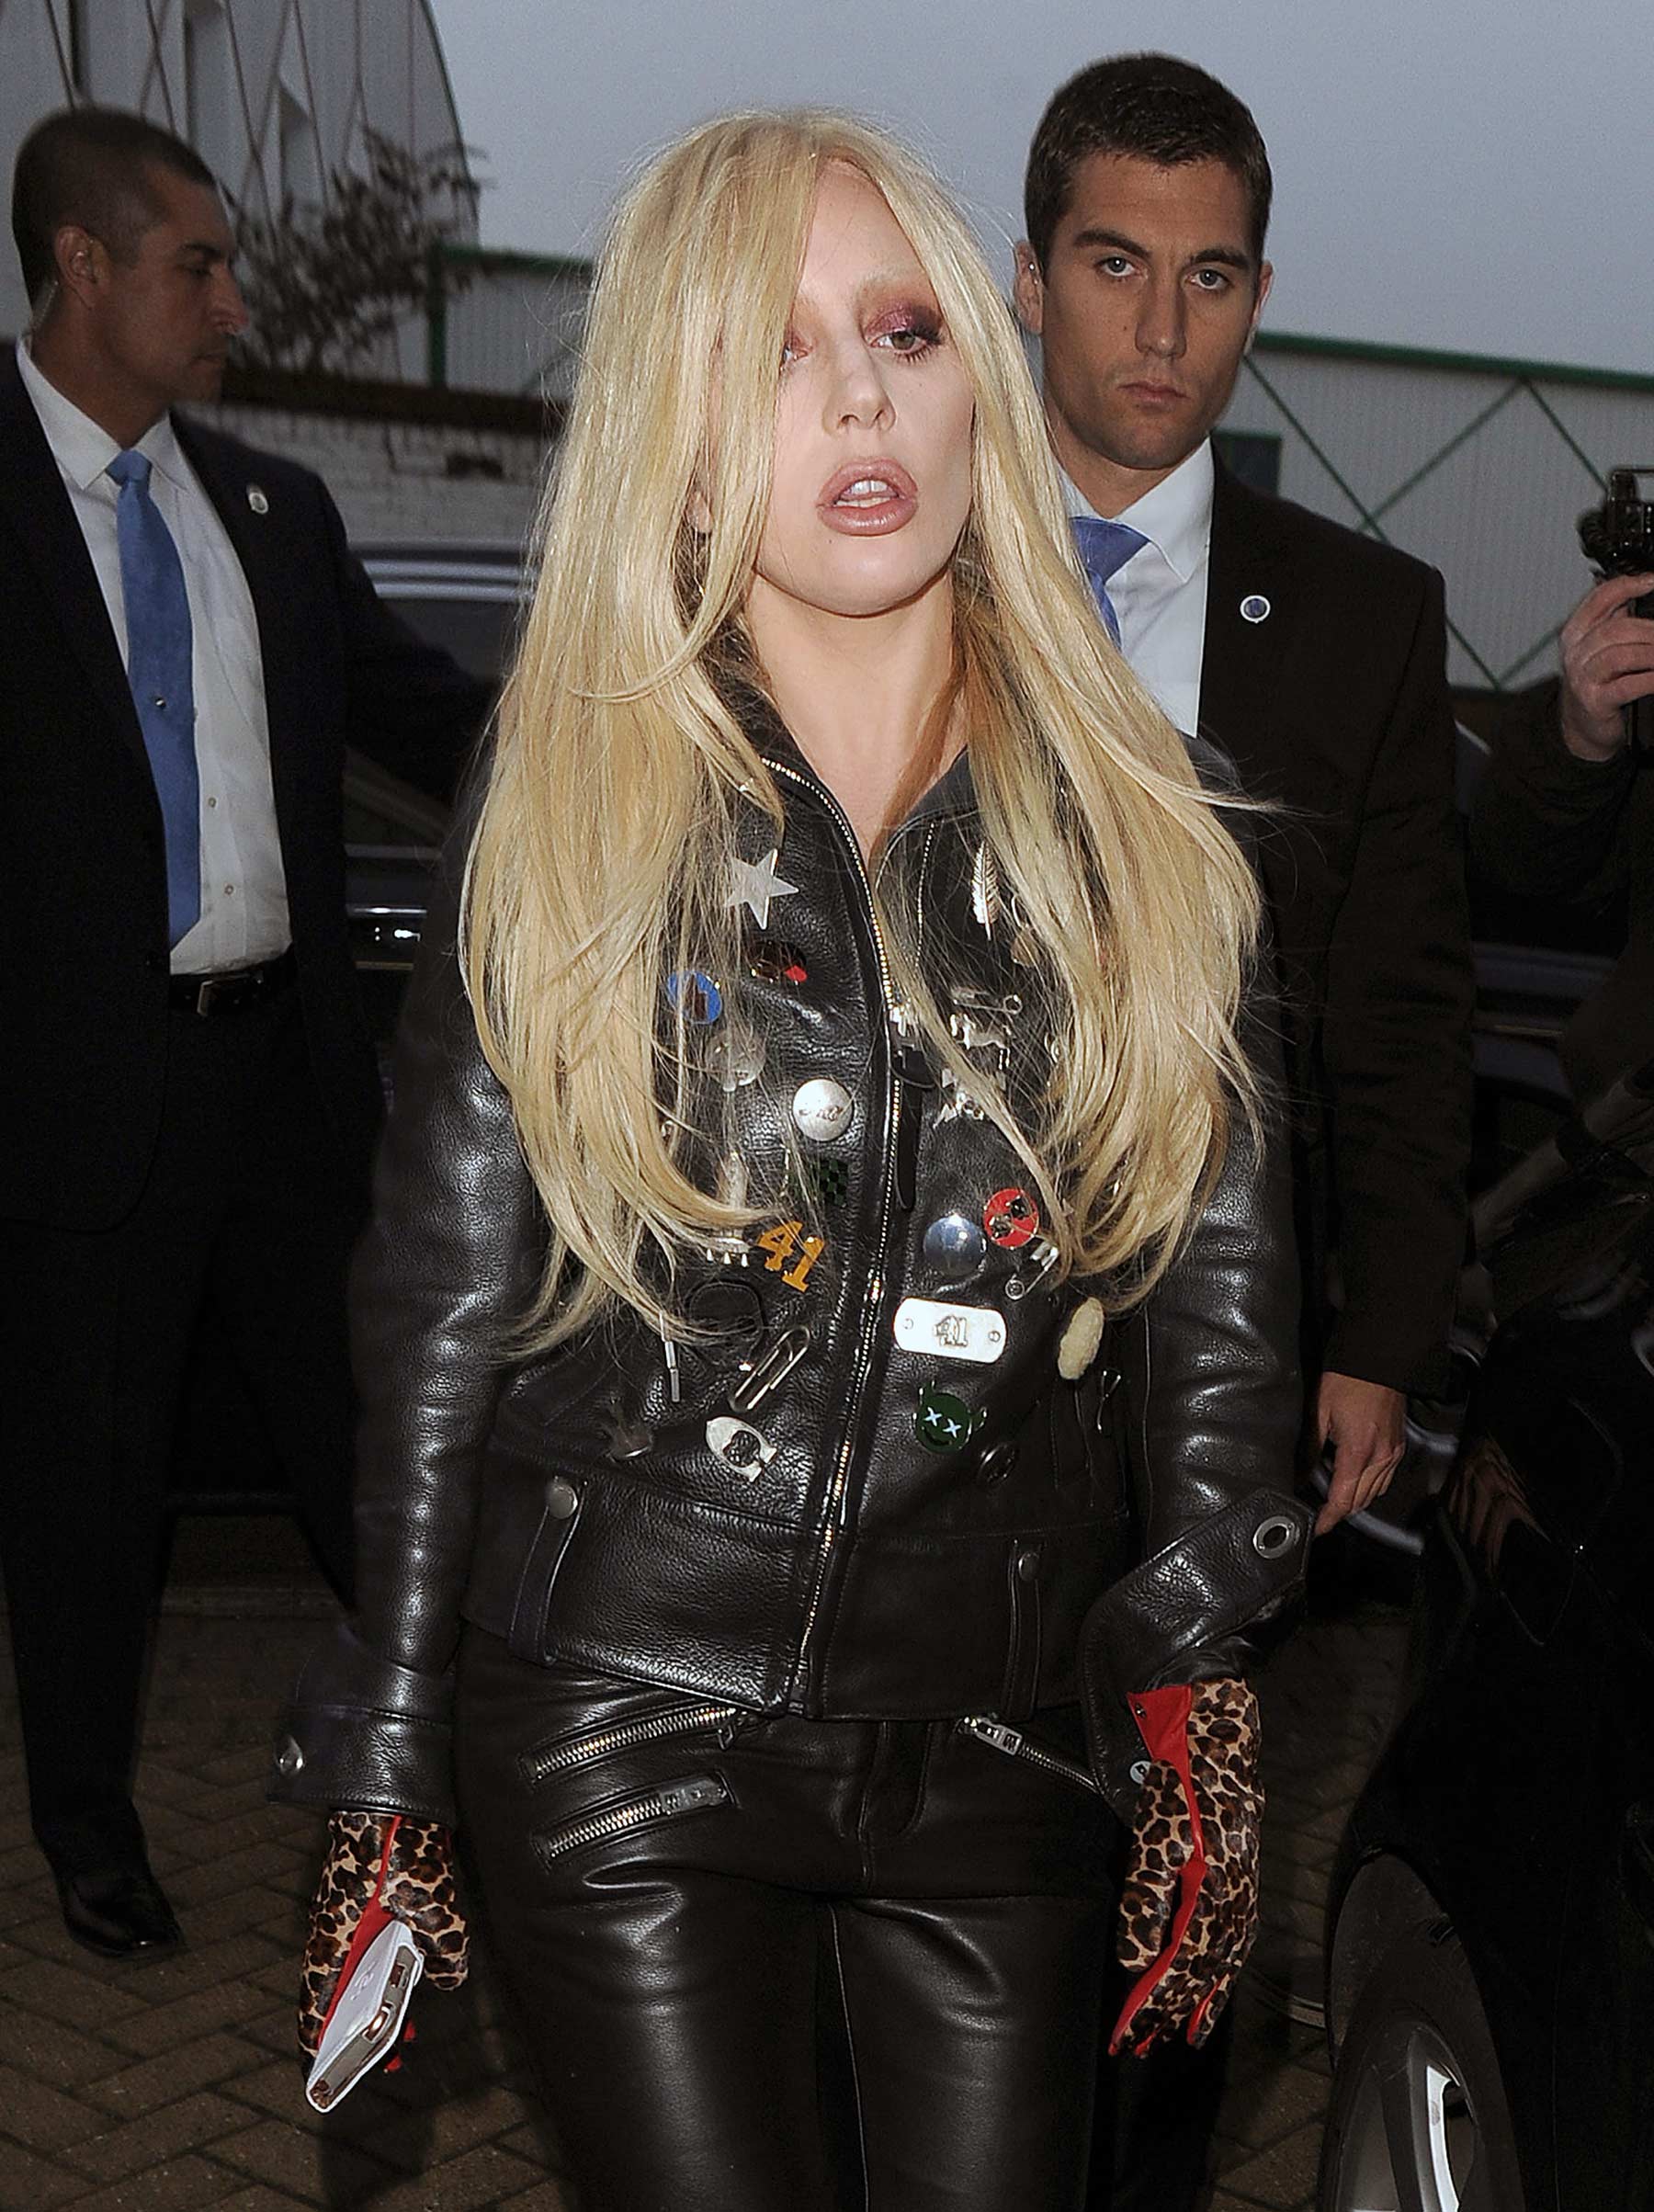 Lady Gaga out and about in London